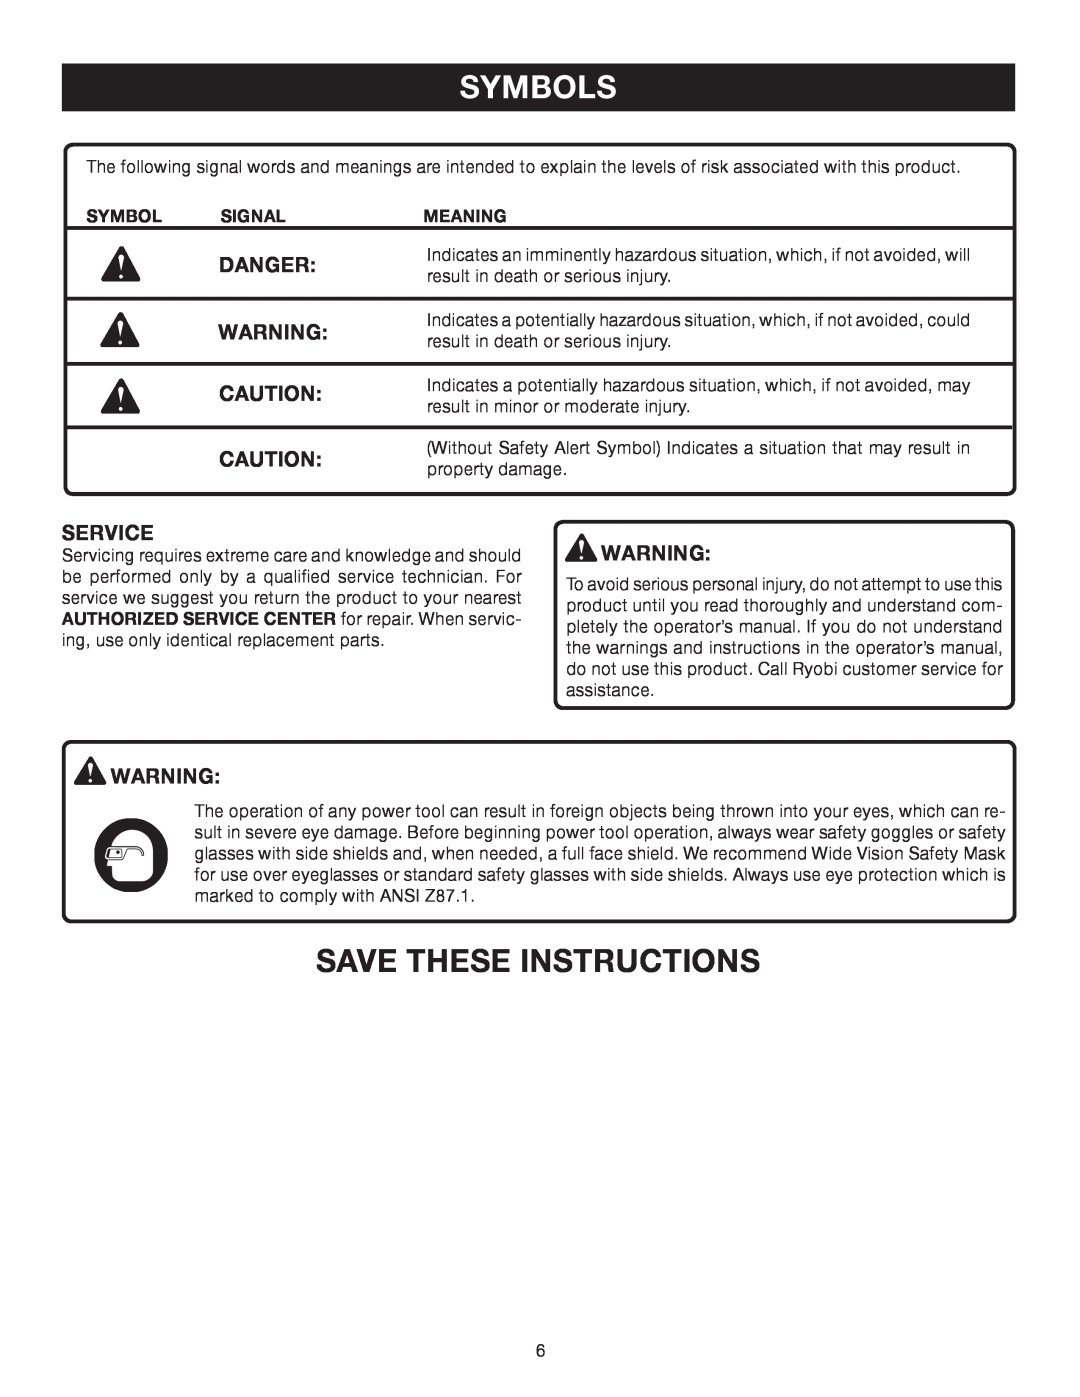 Ryobi RY08576 manual Save These Instructions, Danger, Symbols, Service, Signal, Meaning 